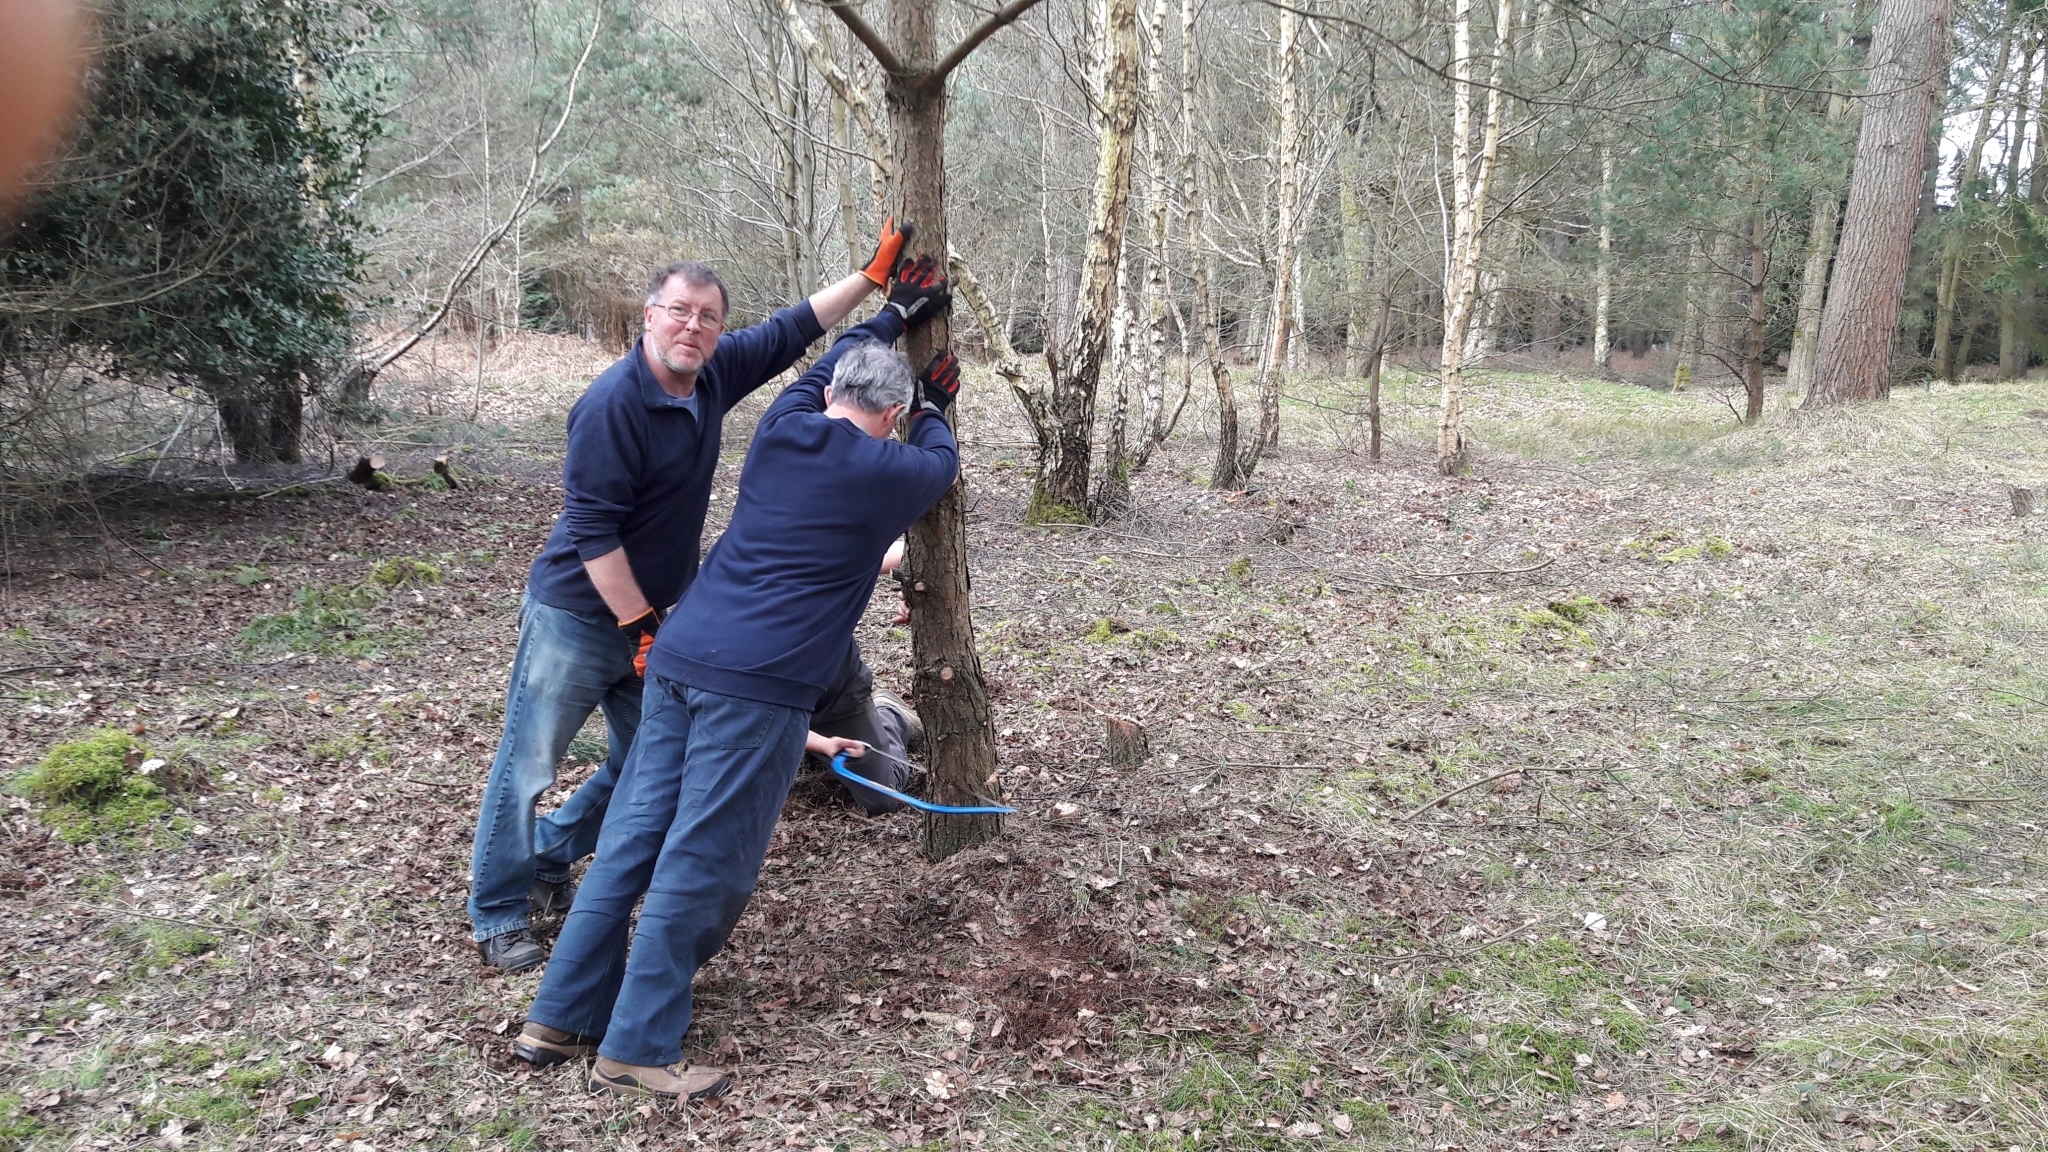 A photo from the FoTF Conservation Event - April 2018 - Improving habitat at High Lodge : A volunteers saws at the base of a small tree while other volunteers lean against the tree